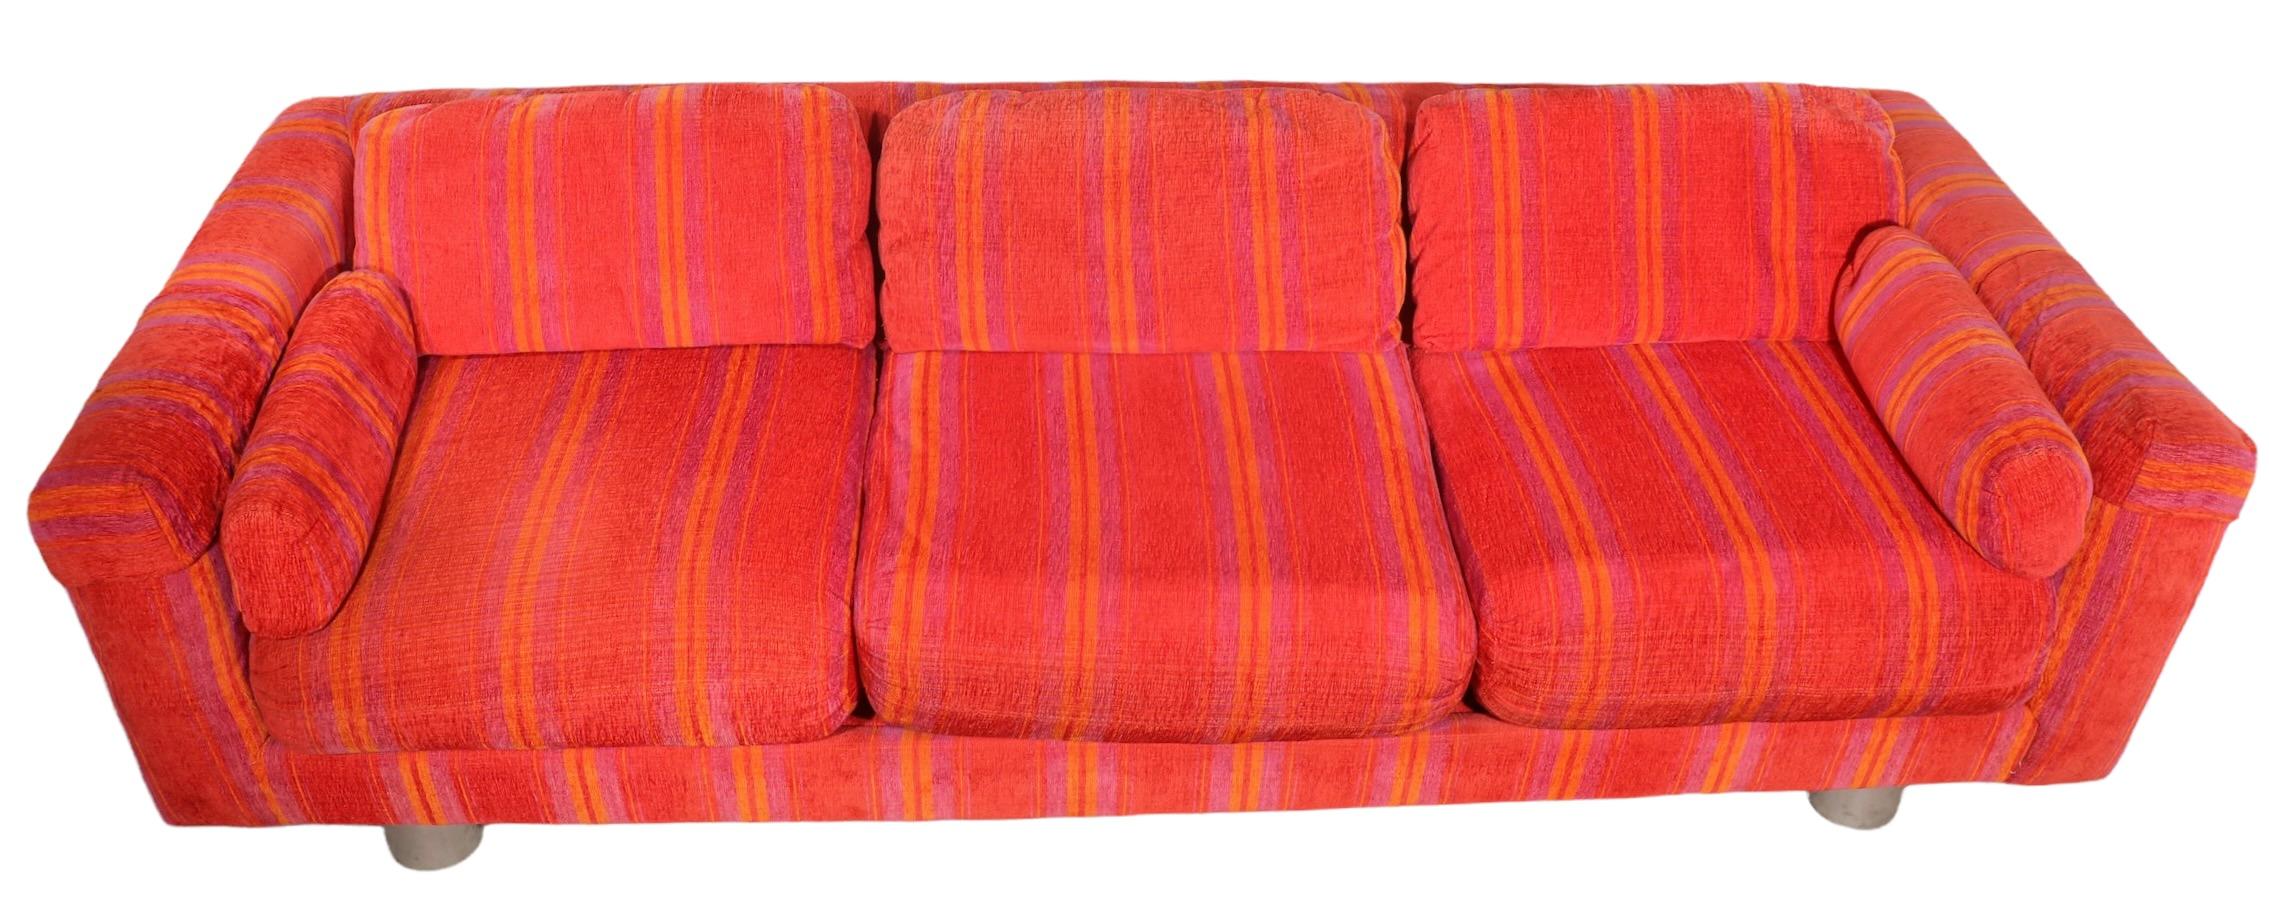 Postmodern Selig Imperial Sofa Possibly by Milo Baughman  For Sale 4